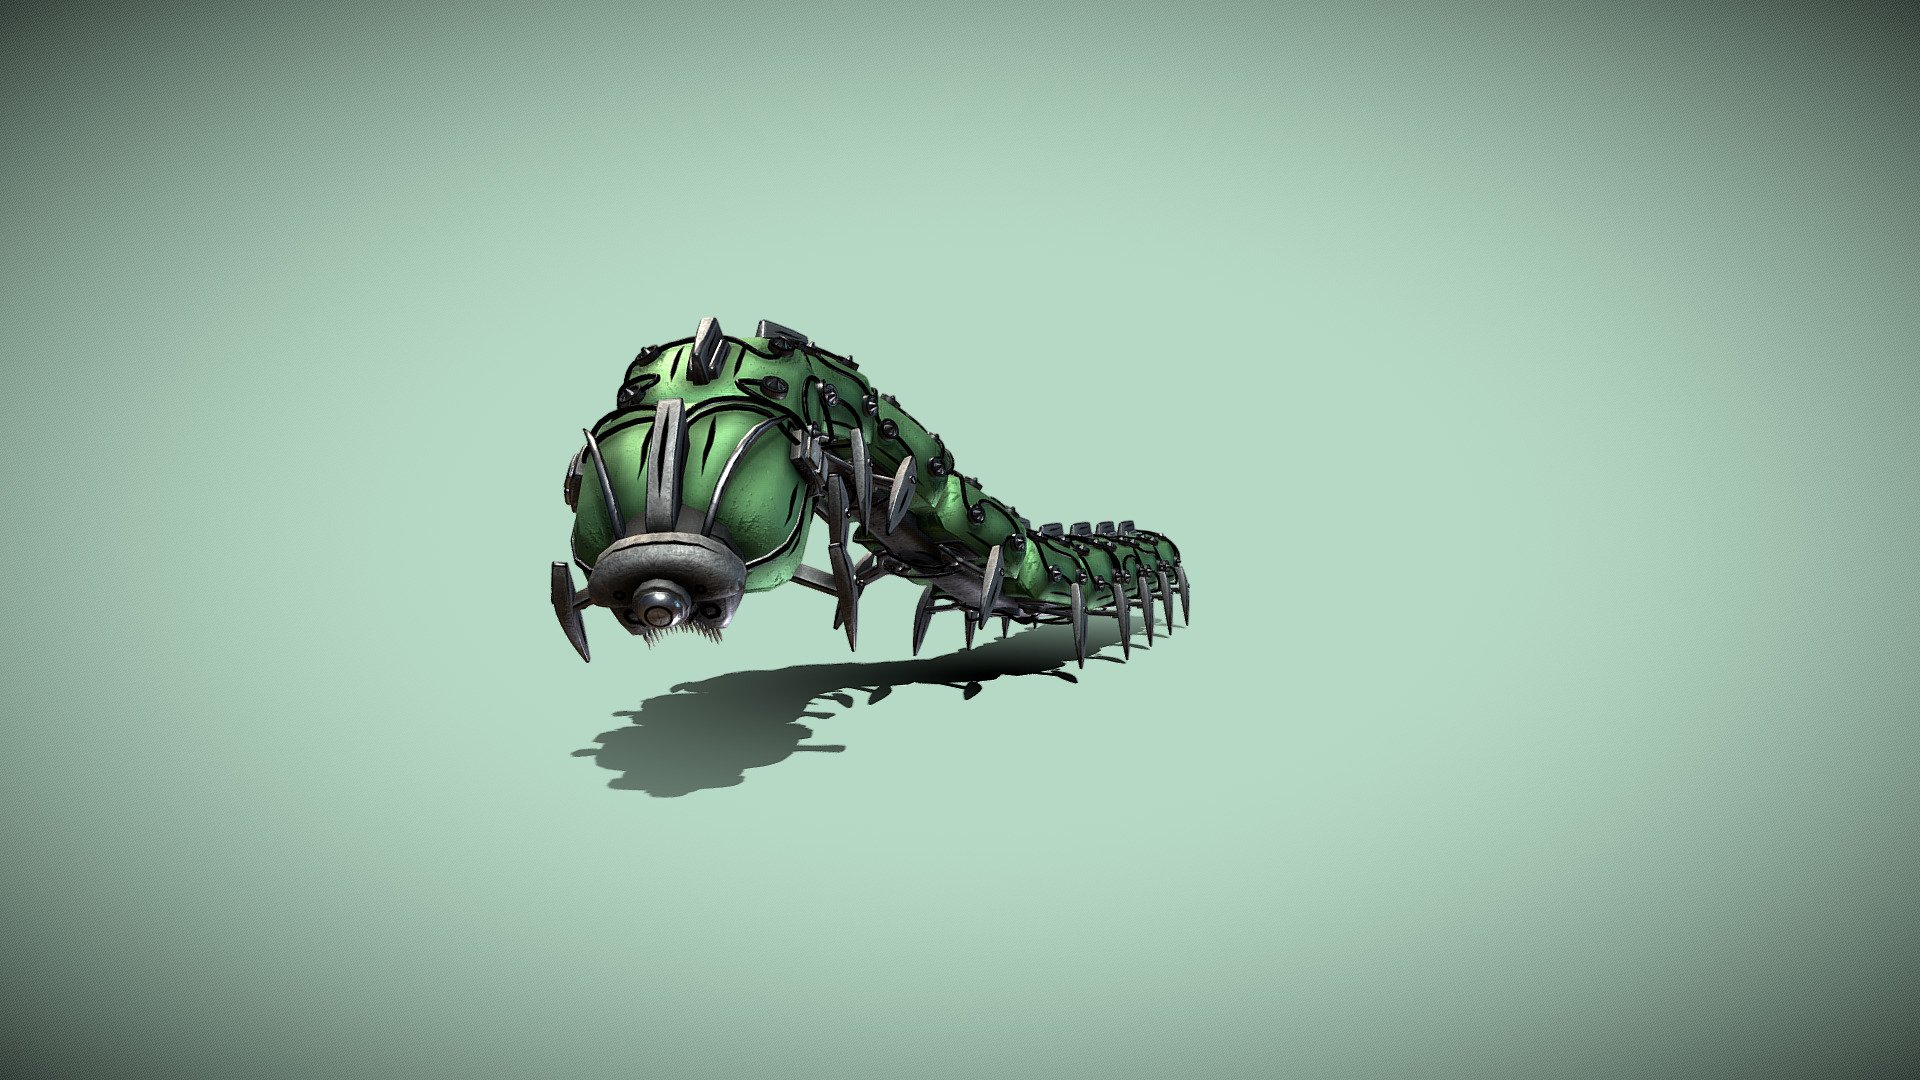 Mecha Millipede

Mecha Millipede, rigged and animated.
UV Unwrapped and textured. 
Comes with textures at 1k, 2k &amp; 4k resolution. 
Contains PBR &amp; Toon (LBS) Shader variations.

The model contains 7 objects, 1 set of materials (+1 Outline for Toon), and 1 set of textures. 
Modeled in Blender, painted in Substance Painter. 
.
.
.
.
.
.
More: 
https://linktr.ee/ed3d - Mecha Millipede - Buy Royalty Free 3D model by Ed (@Ed3D.Blend) 3d model